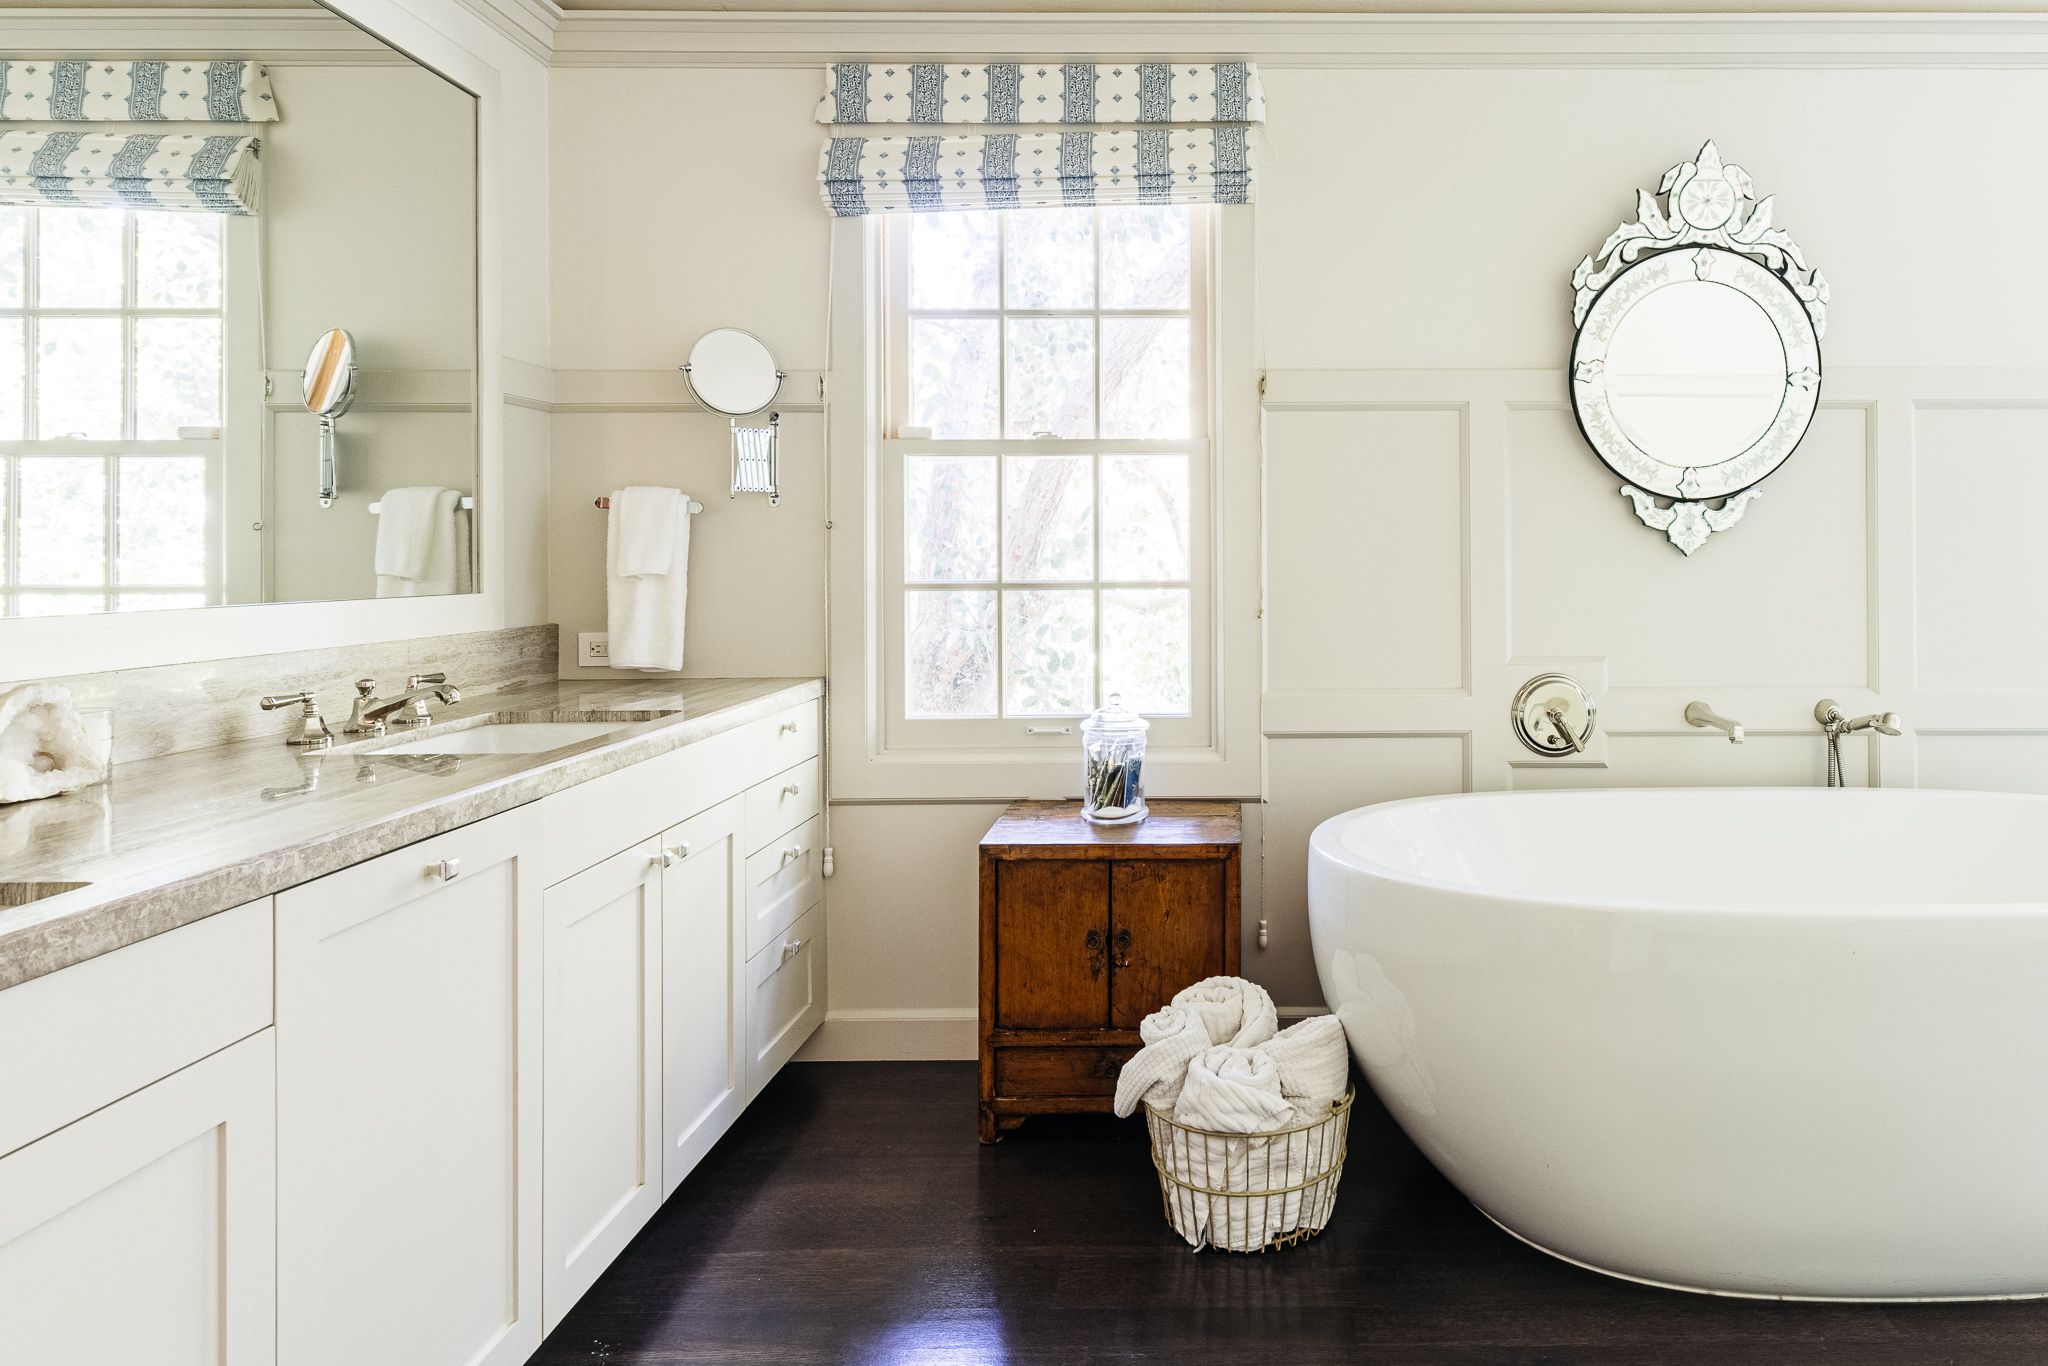 Should You Put Hardwood Floors in Bathrooms? The Pros and Cons